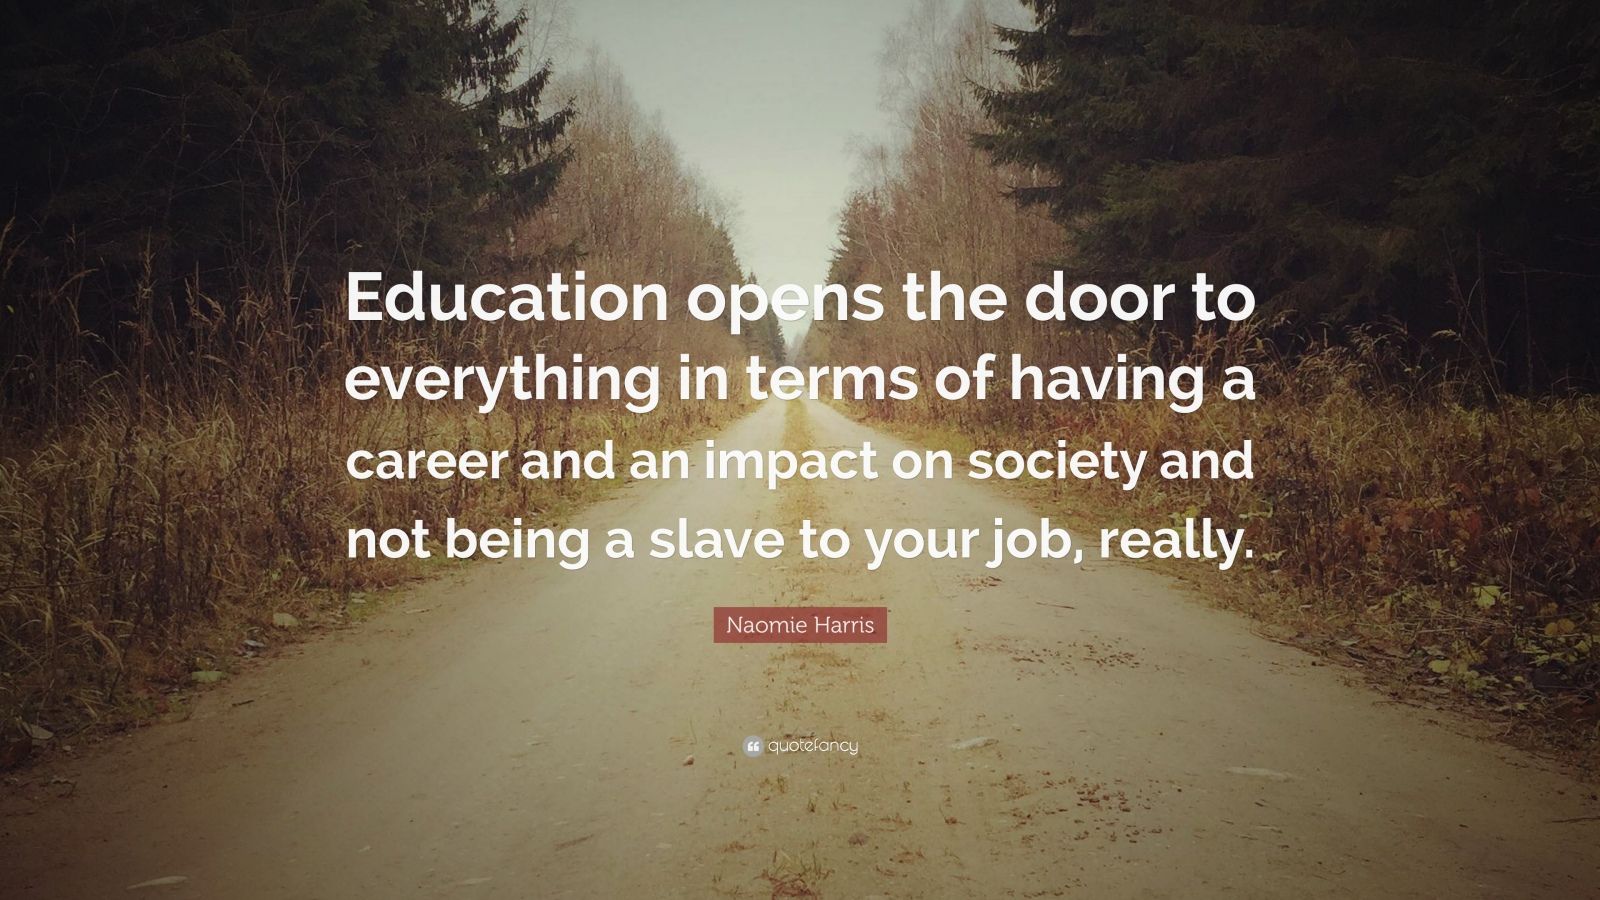 a good education opens doors for you essay